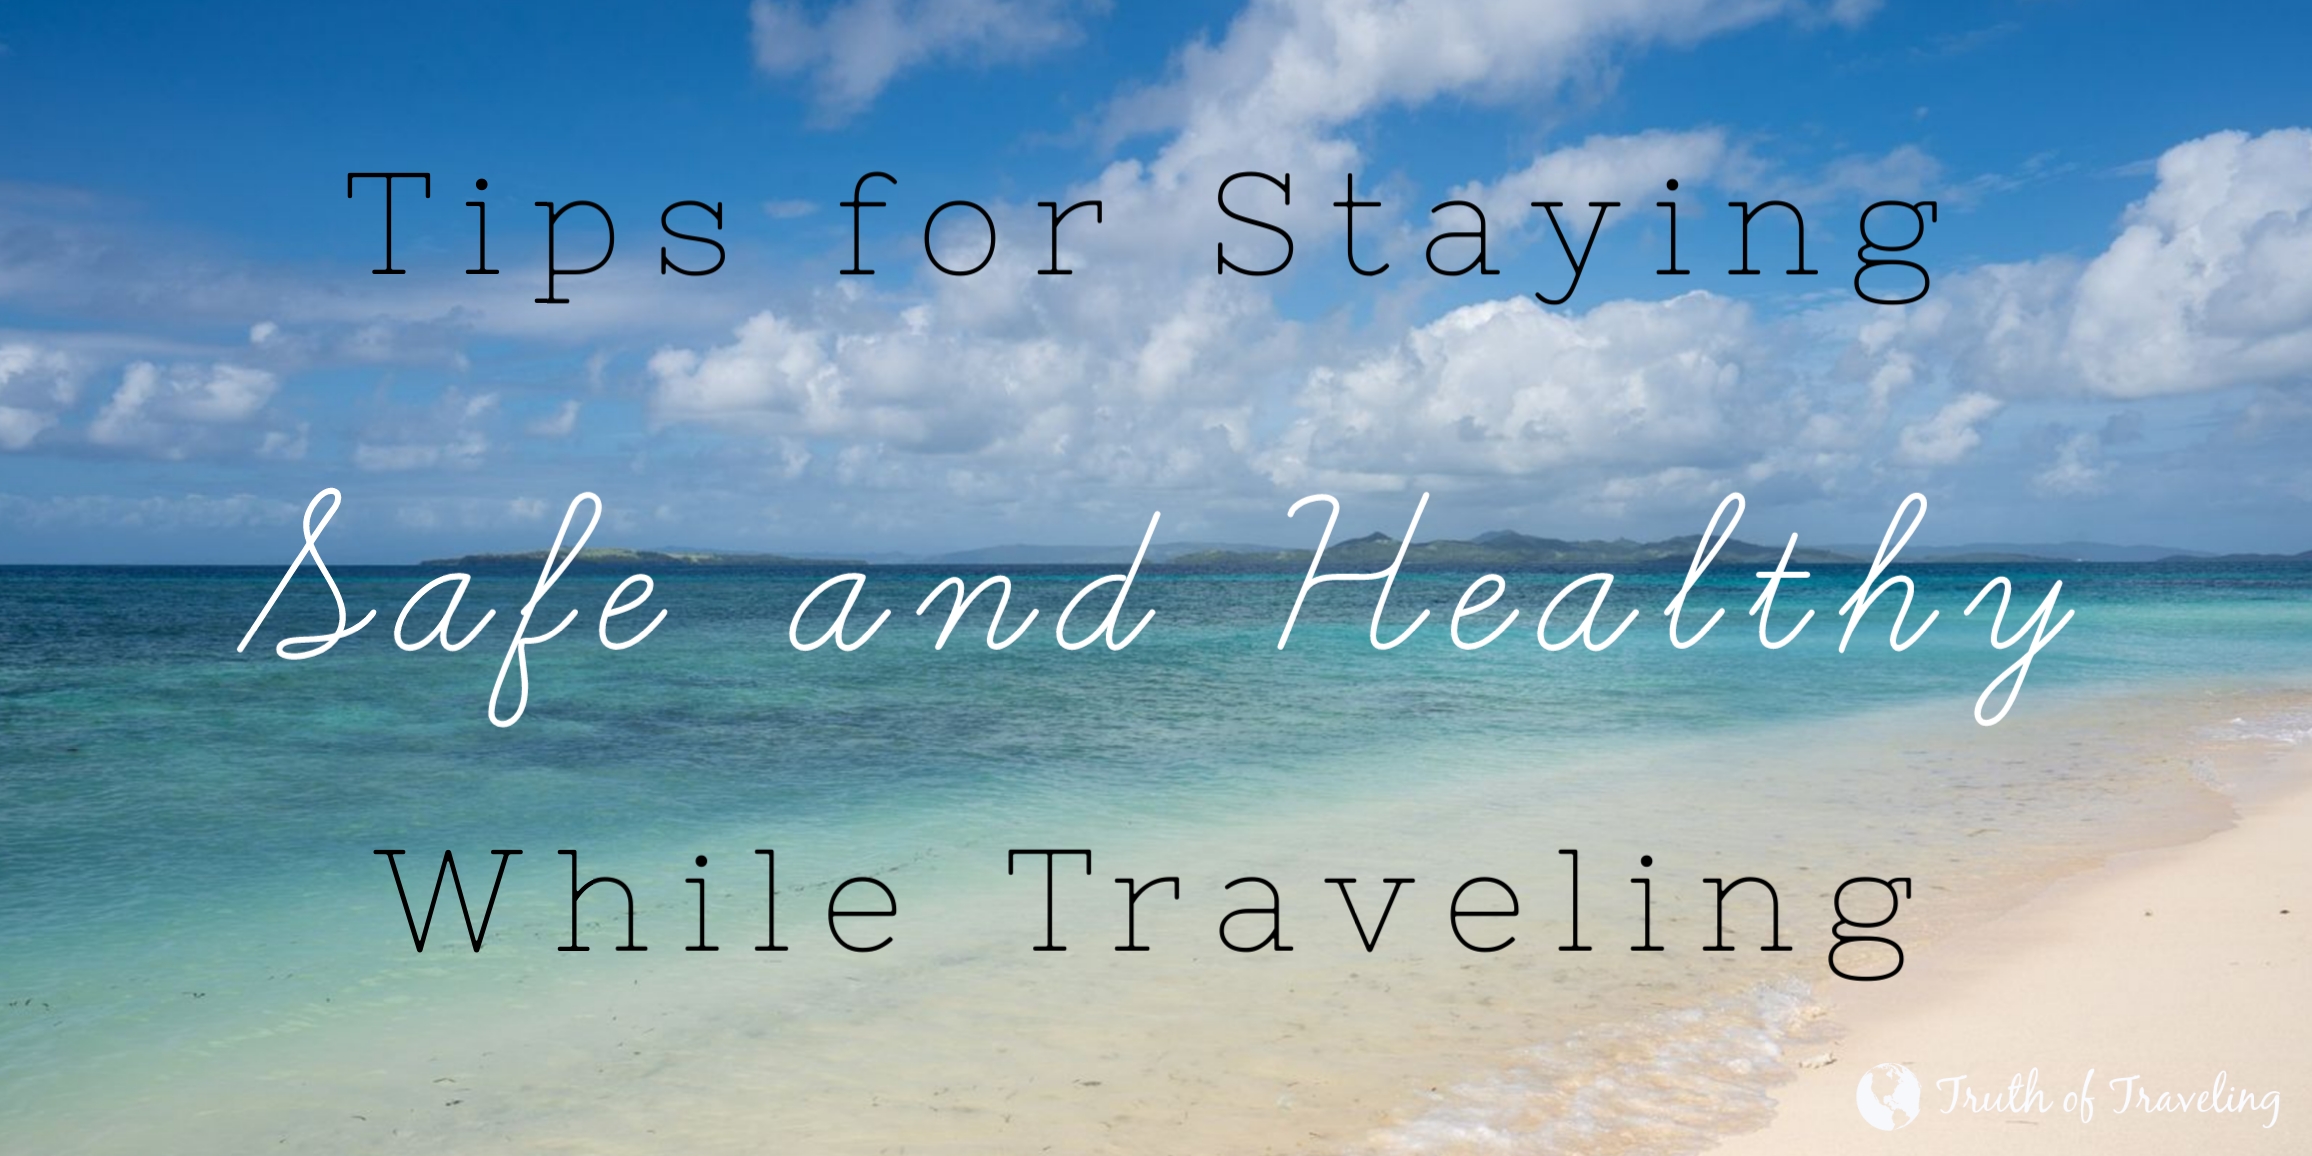 Tips for Staying Safe and Healthy While Traveling - Truth of Traveling